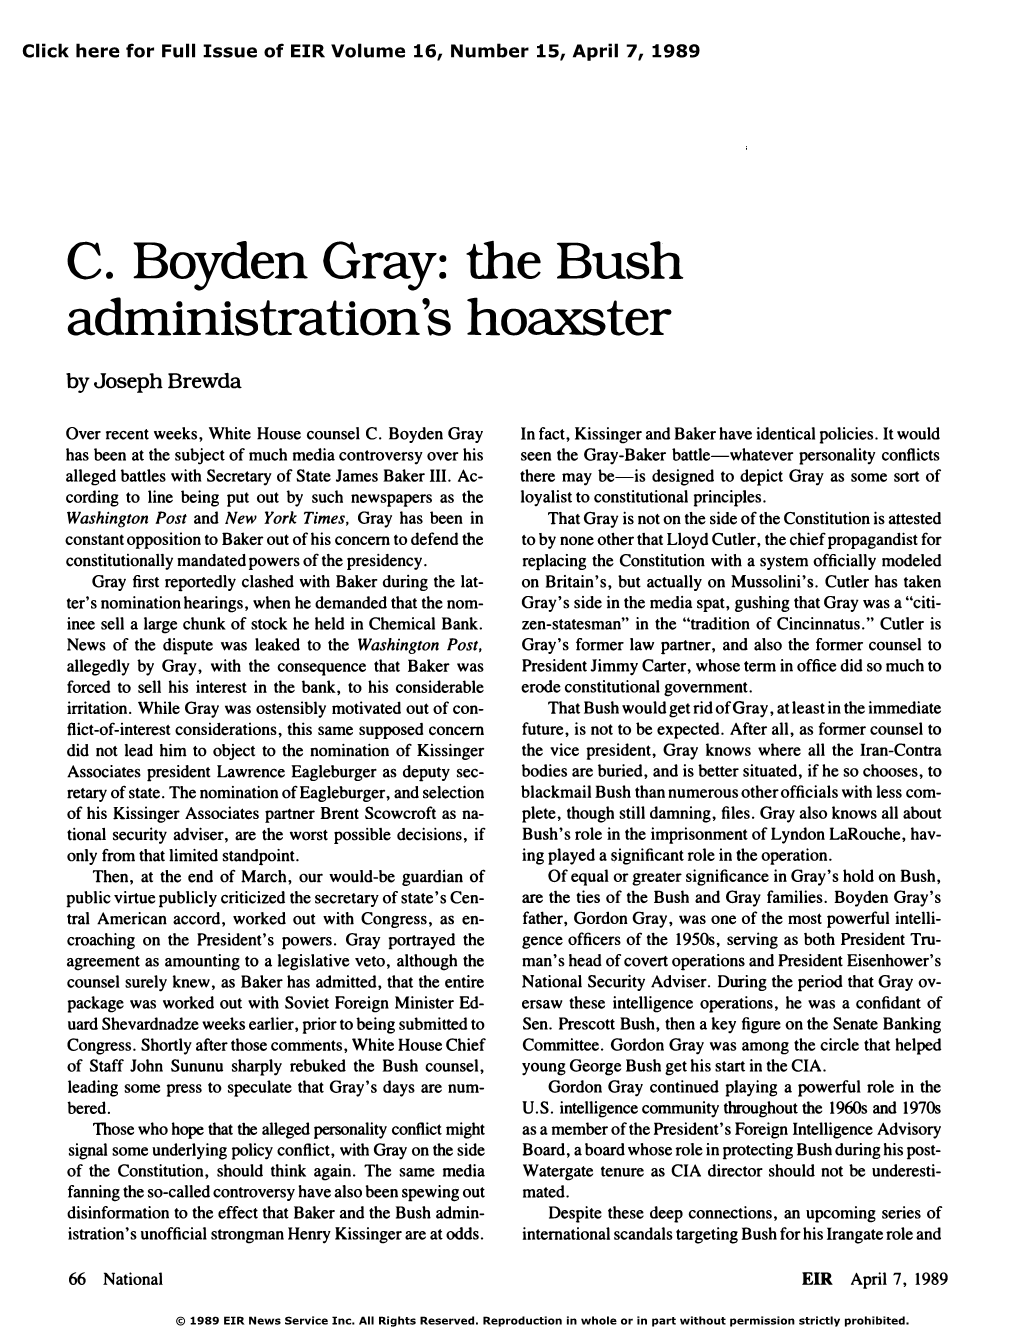 C. Boyden Gray: the Bush Administration's Hoaxster